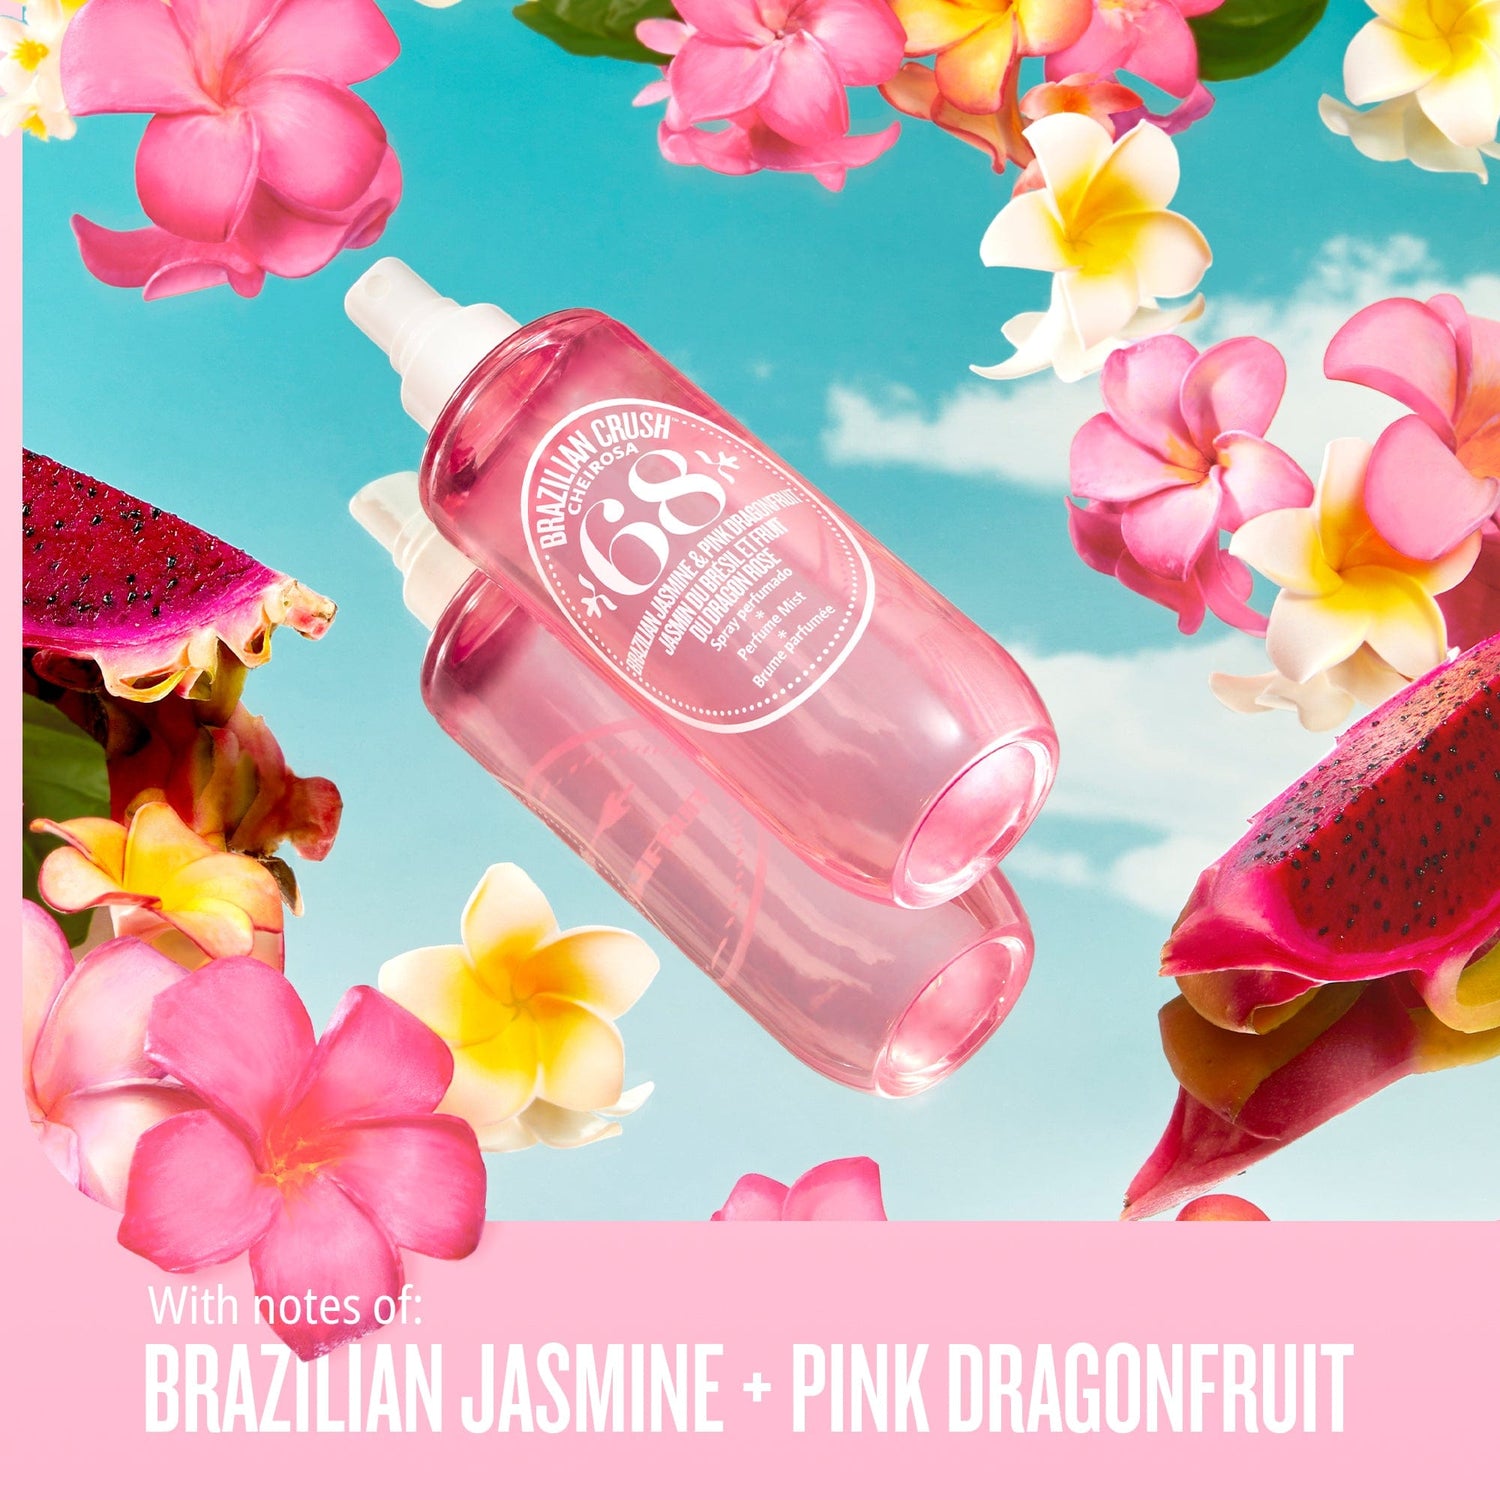 with notes of: Brazilian jasmine and pink dragonfruit